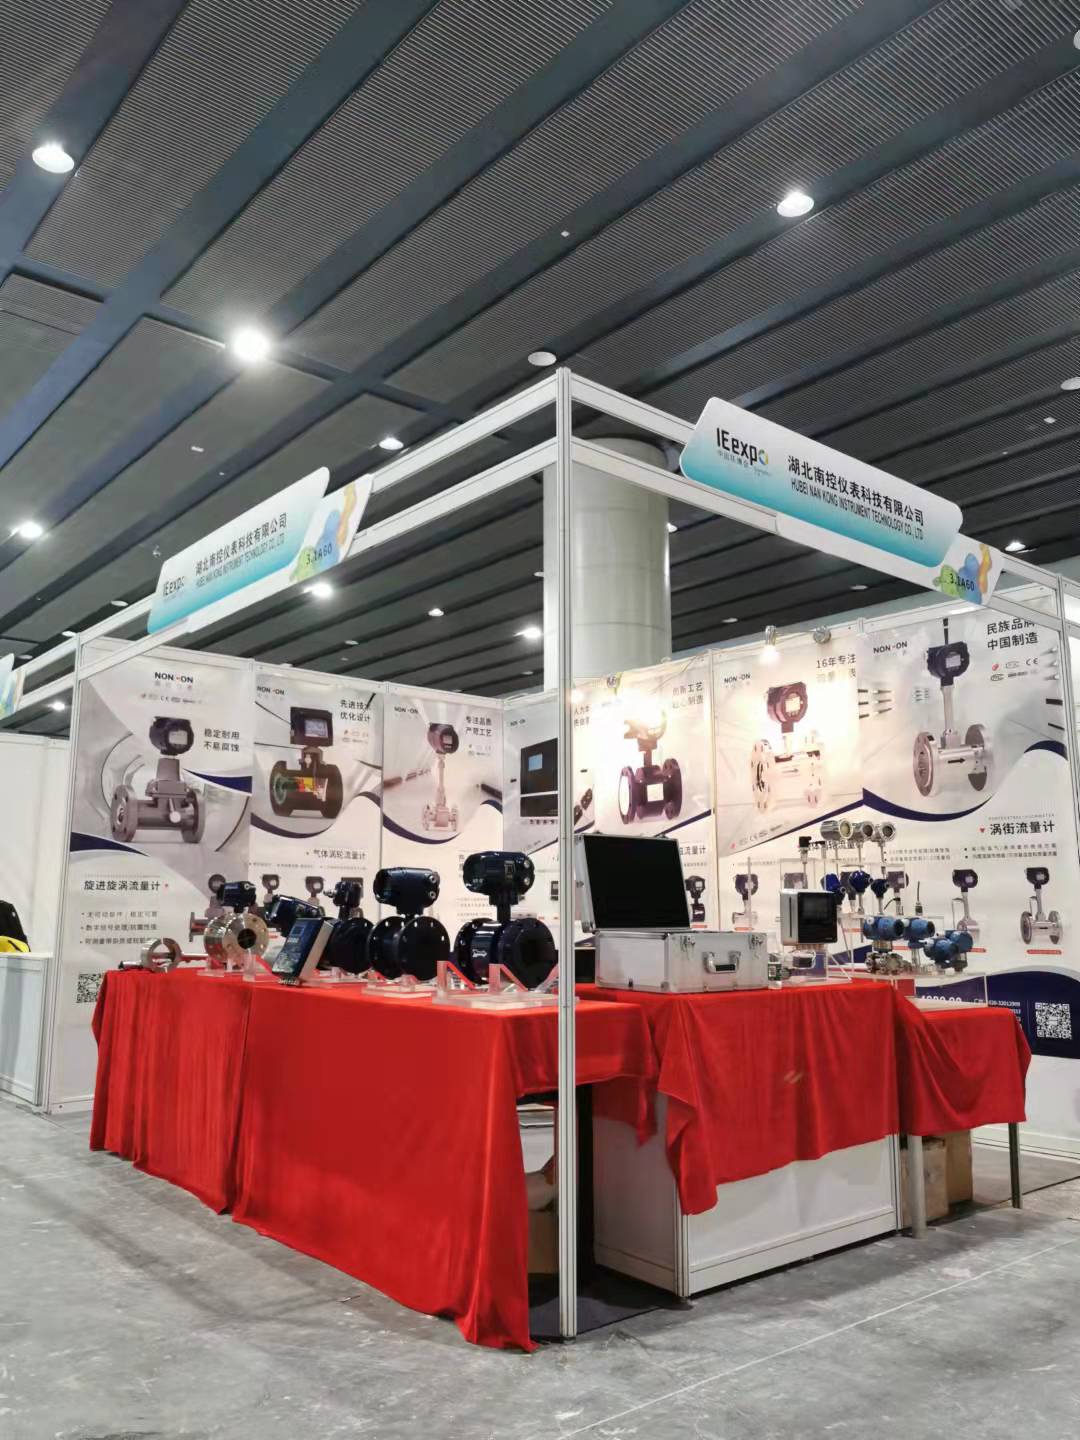 Welcome to IE expo Guangzhou 2019 on Spt 18th-20th